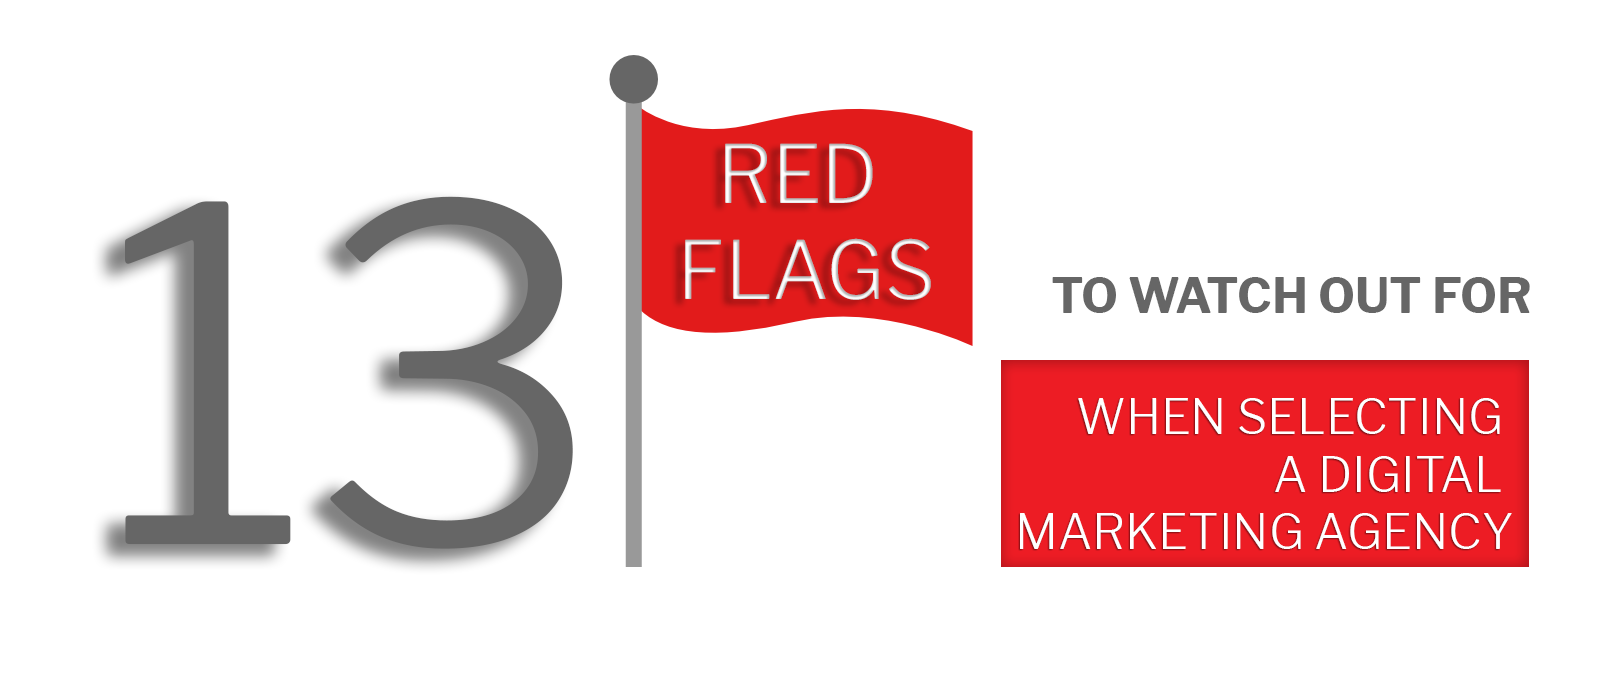 13-Red-Flags-To-Watch-Out-For-When-Selecting-A-Digital-Marketing-Agency